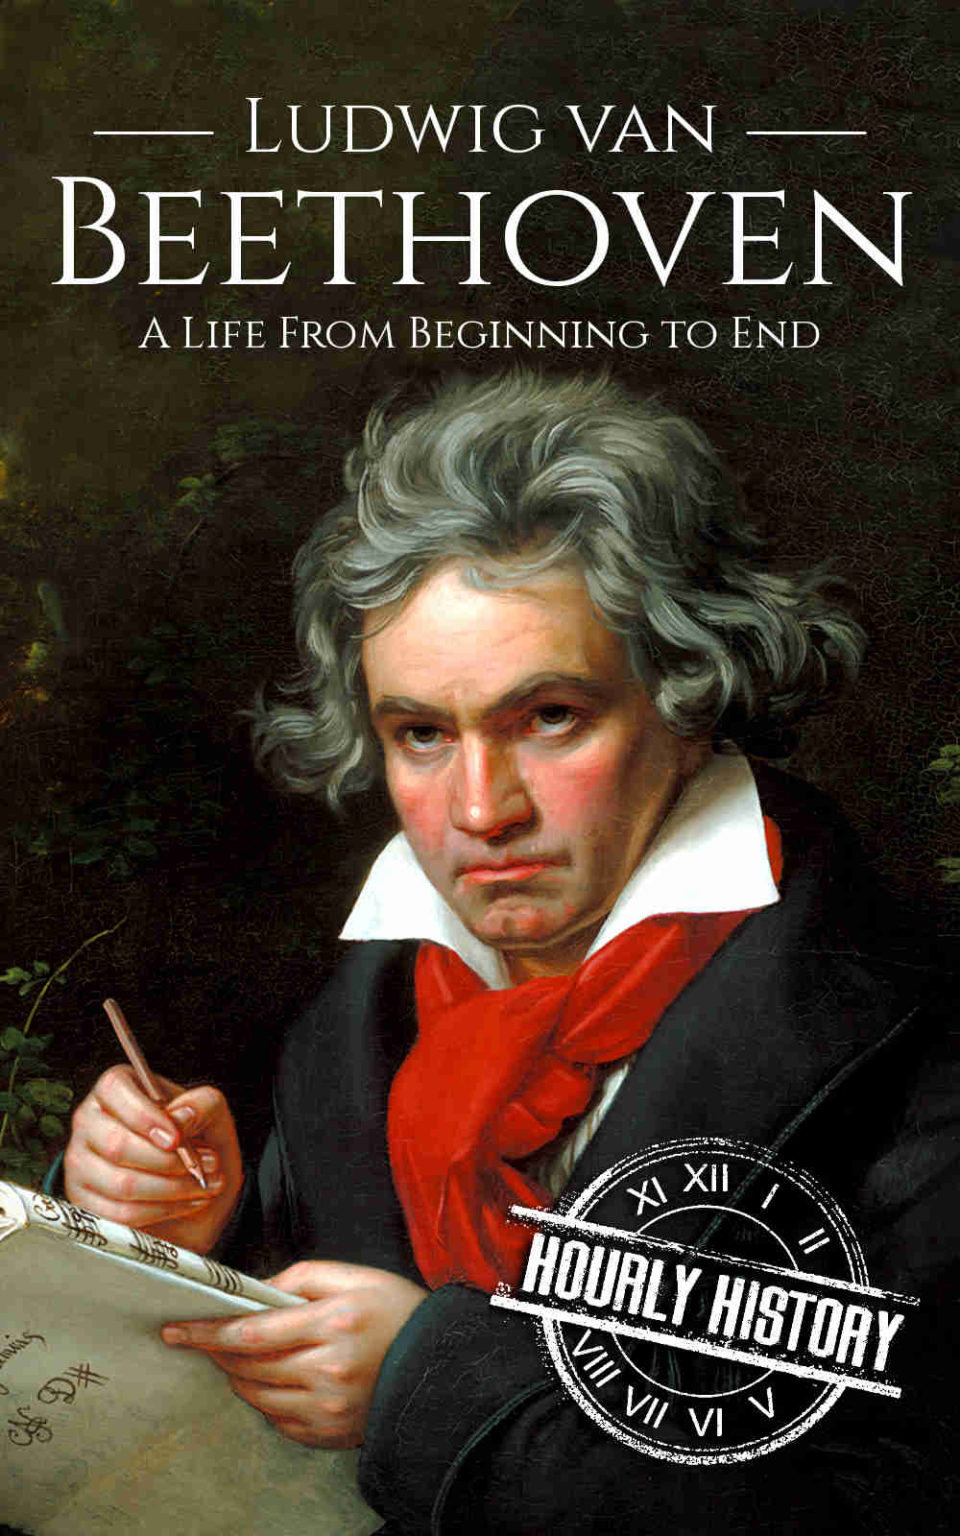 beethoven biography paper